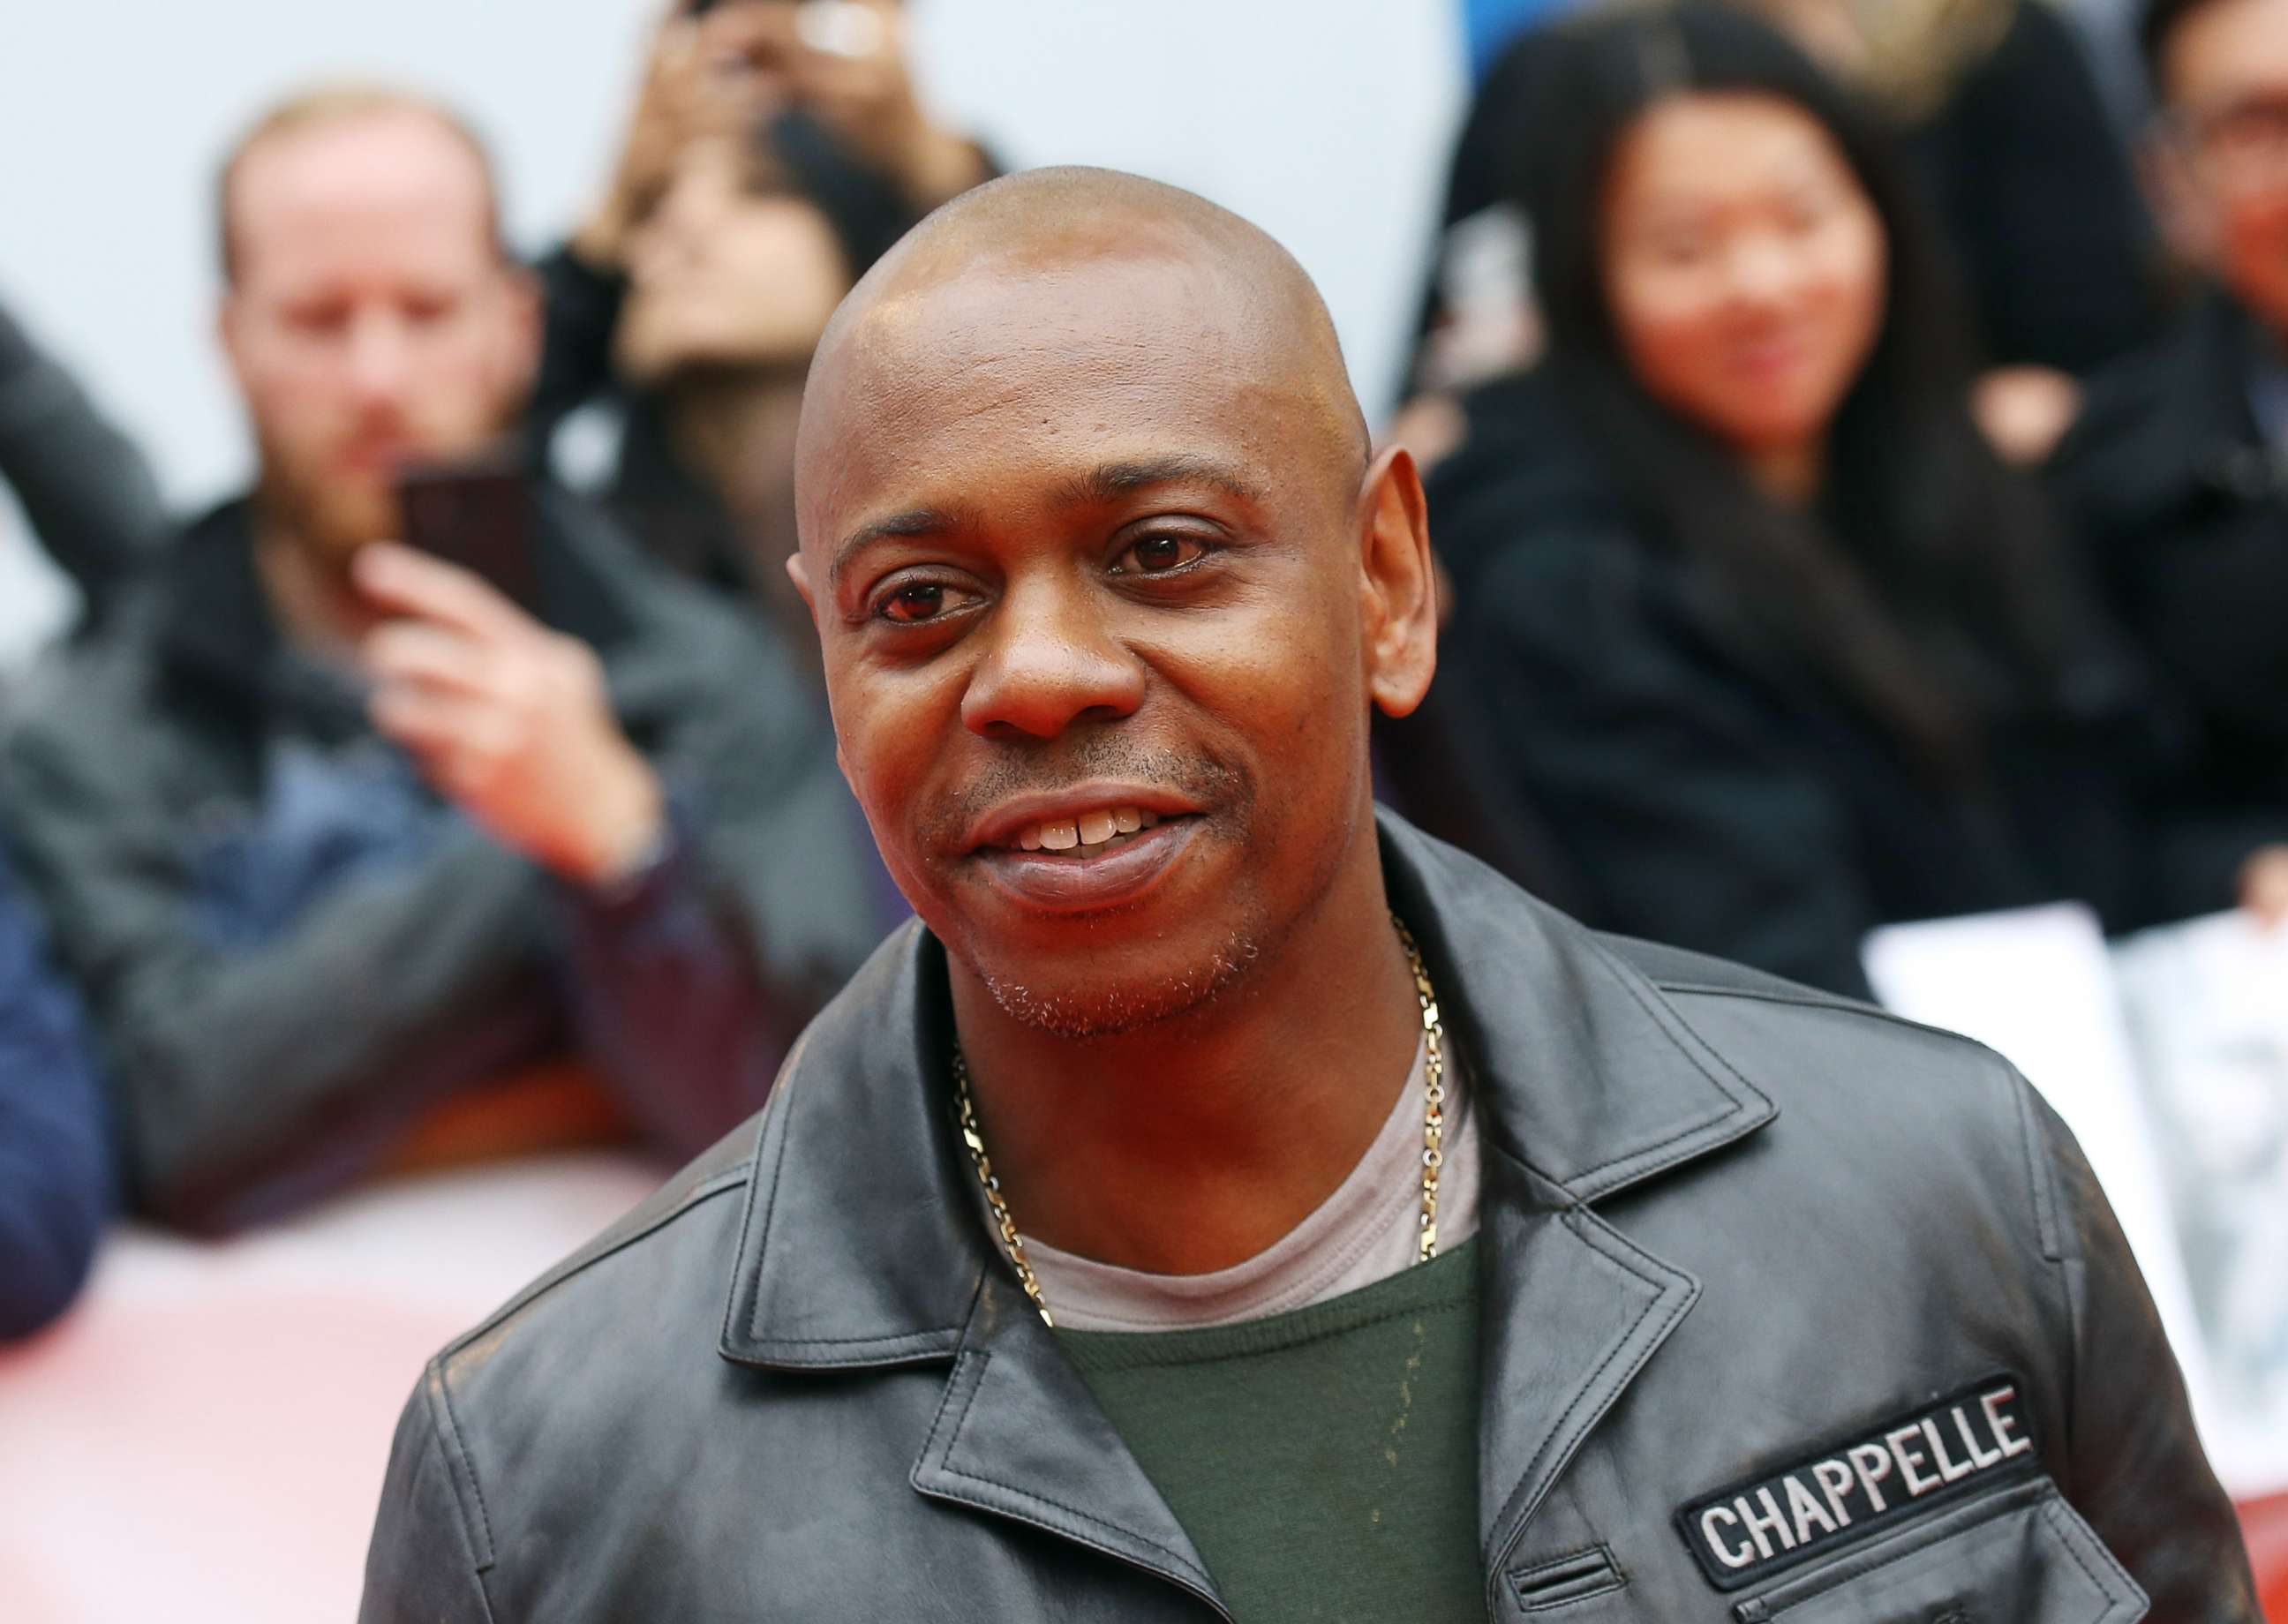 PHOTO: Dave Chappelle arrives to the premiere of "A Star is Born" during the 2018 Toronto International Film Festival held, Sept. 9, 2018, in Toronto, Canada.